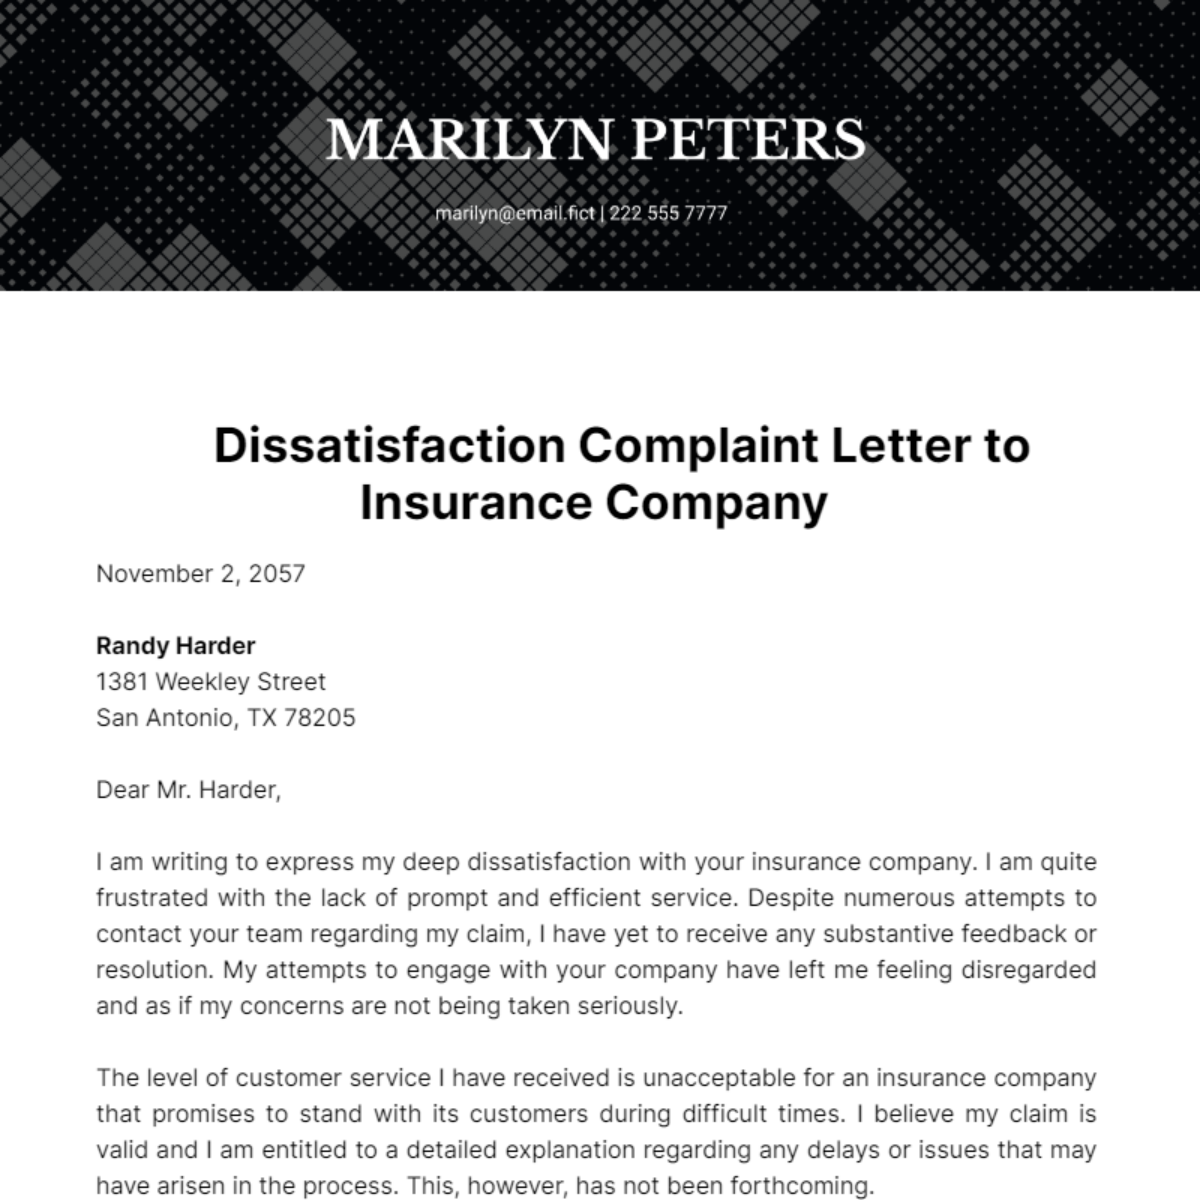 Dissatisfaction Complaint Letter to Insurance Company Template